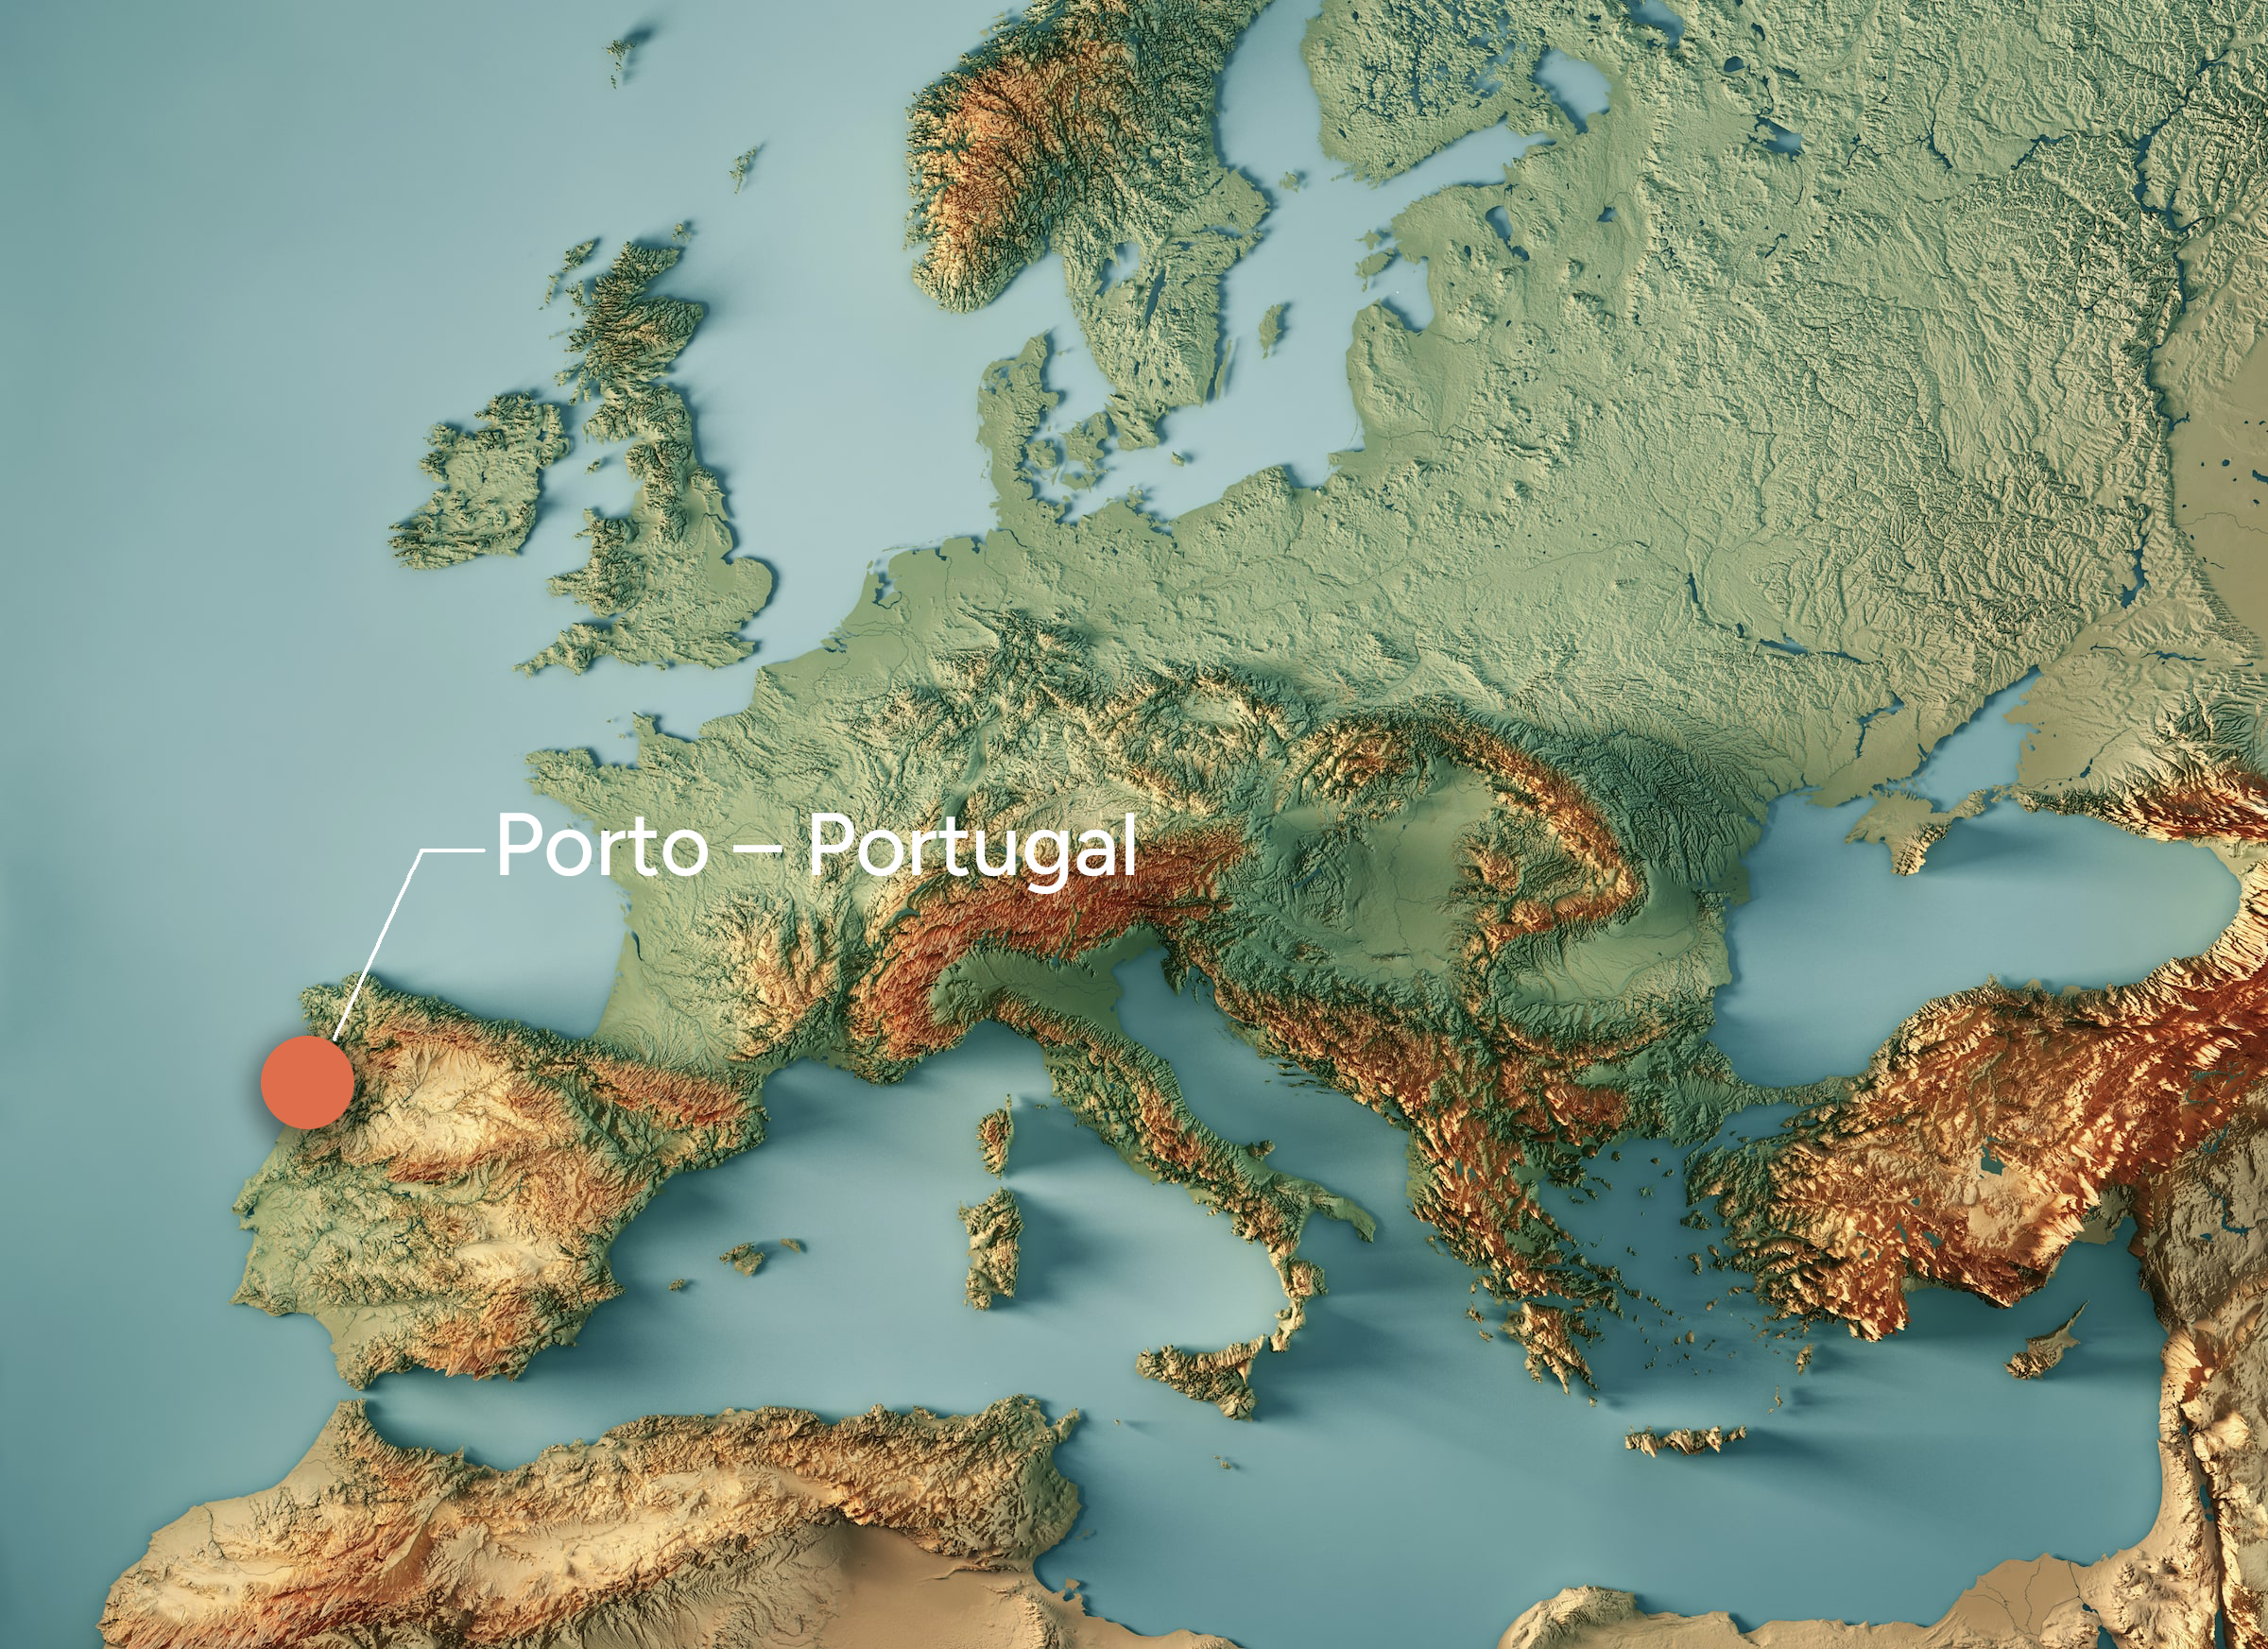 Topography map of Europe highlighting Porto, Portugal